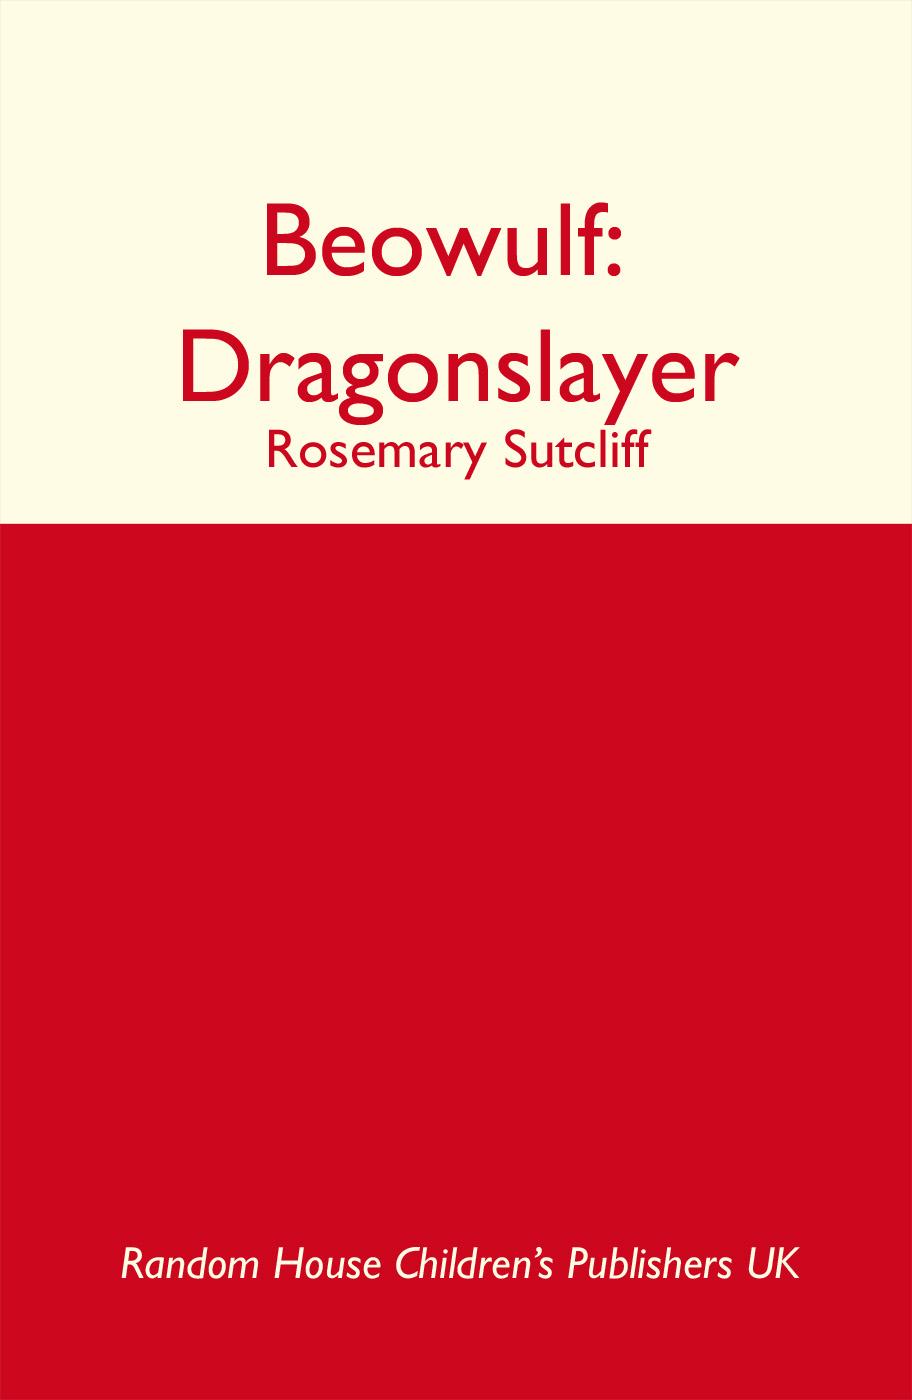 Beowulf (1992) by Rosemary Sutcliff